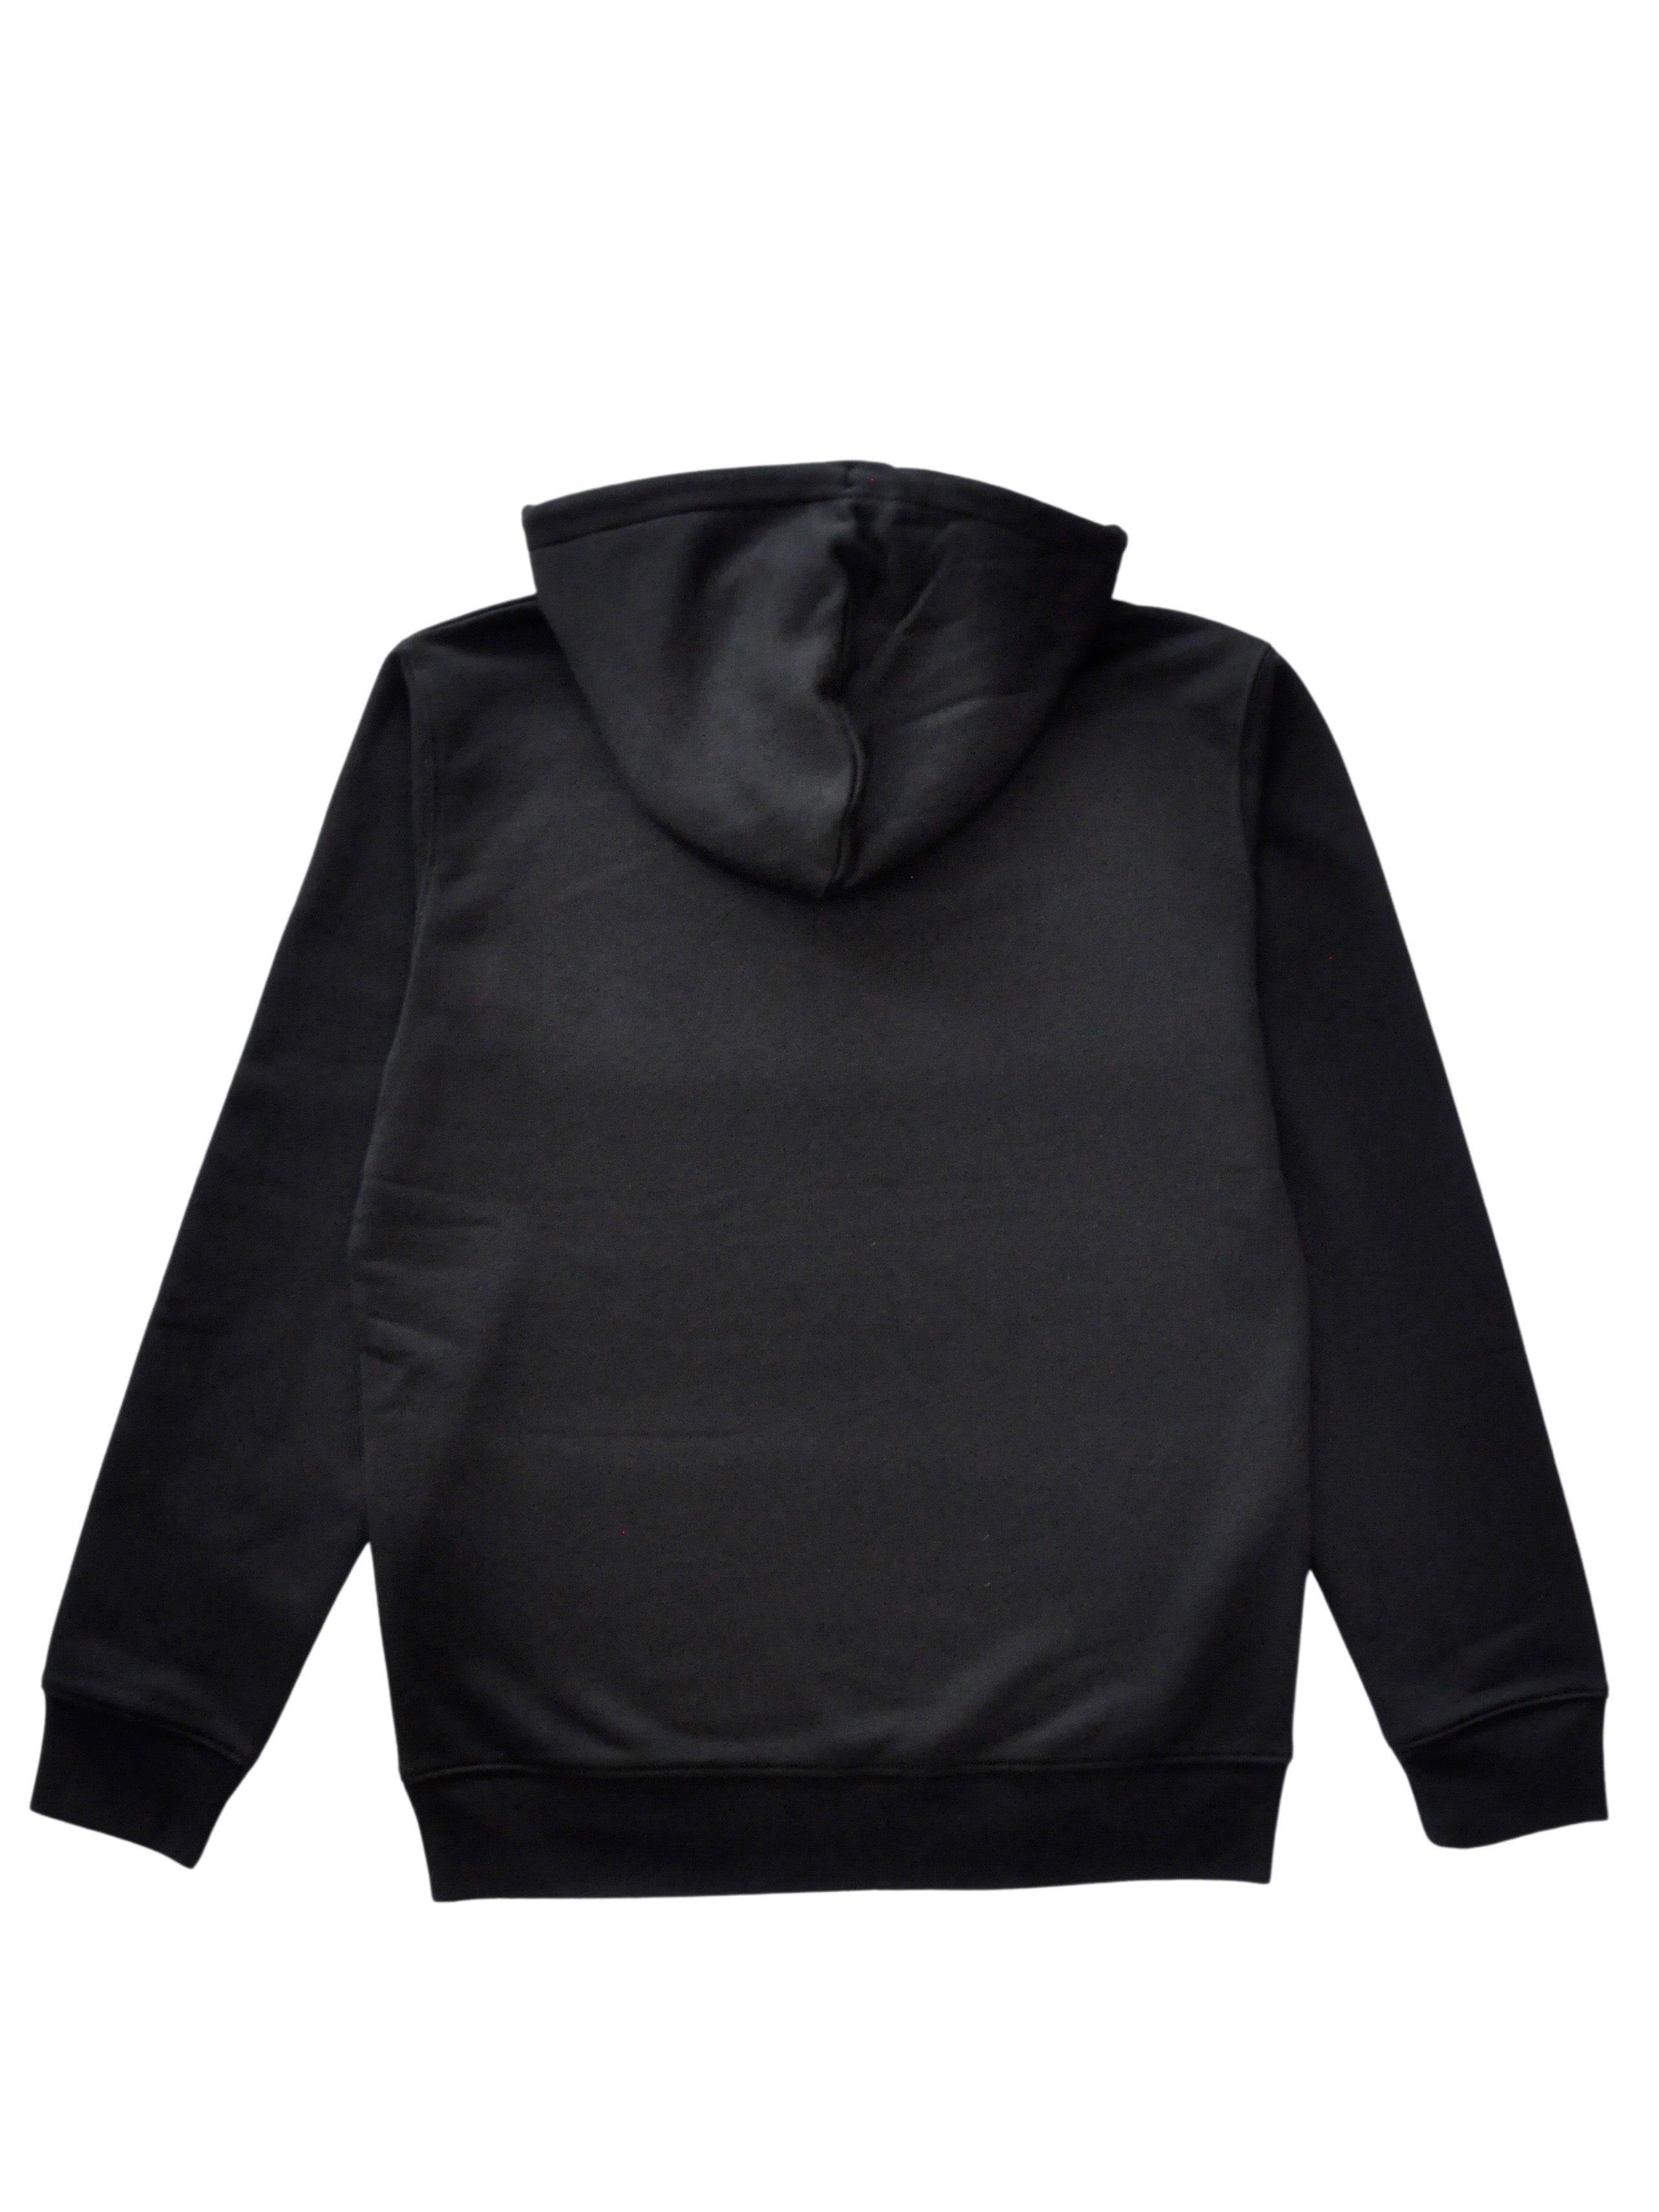 BY11 Organic Cotton Embroidered Logo Hoodie - Black/Multi